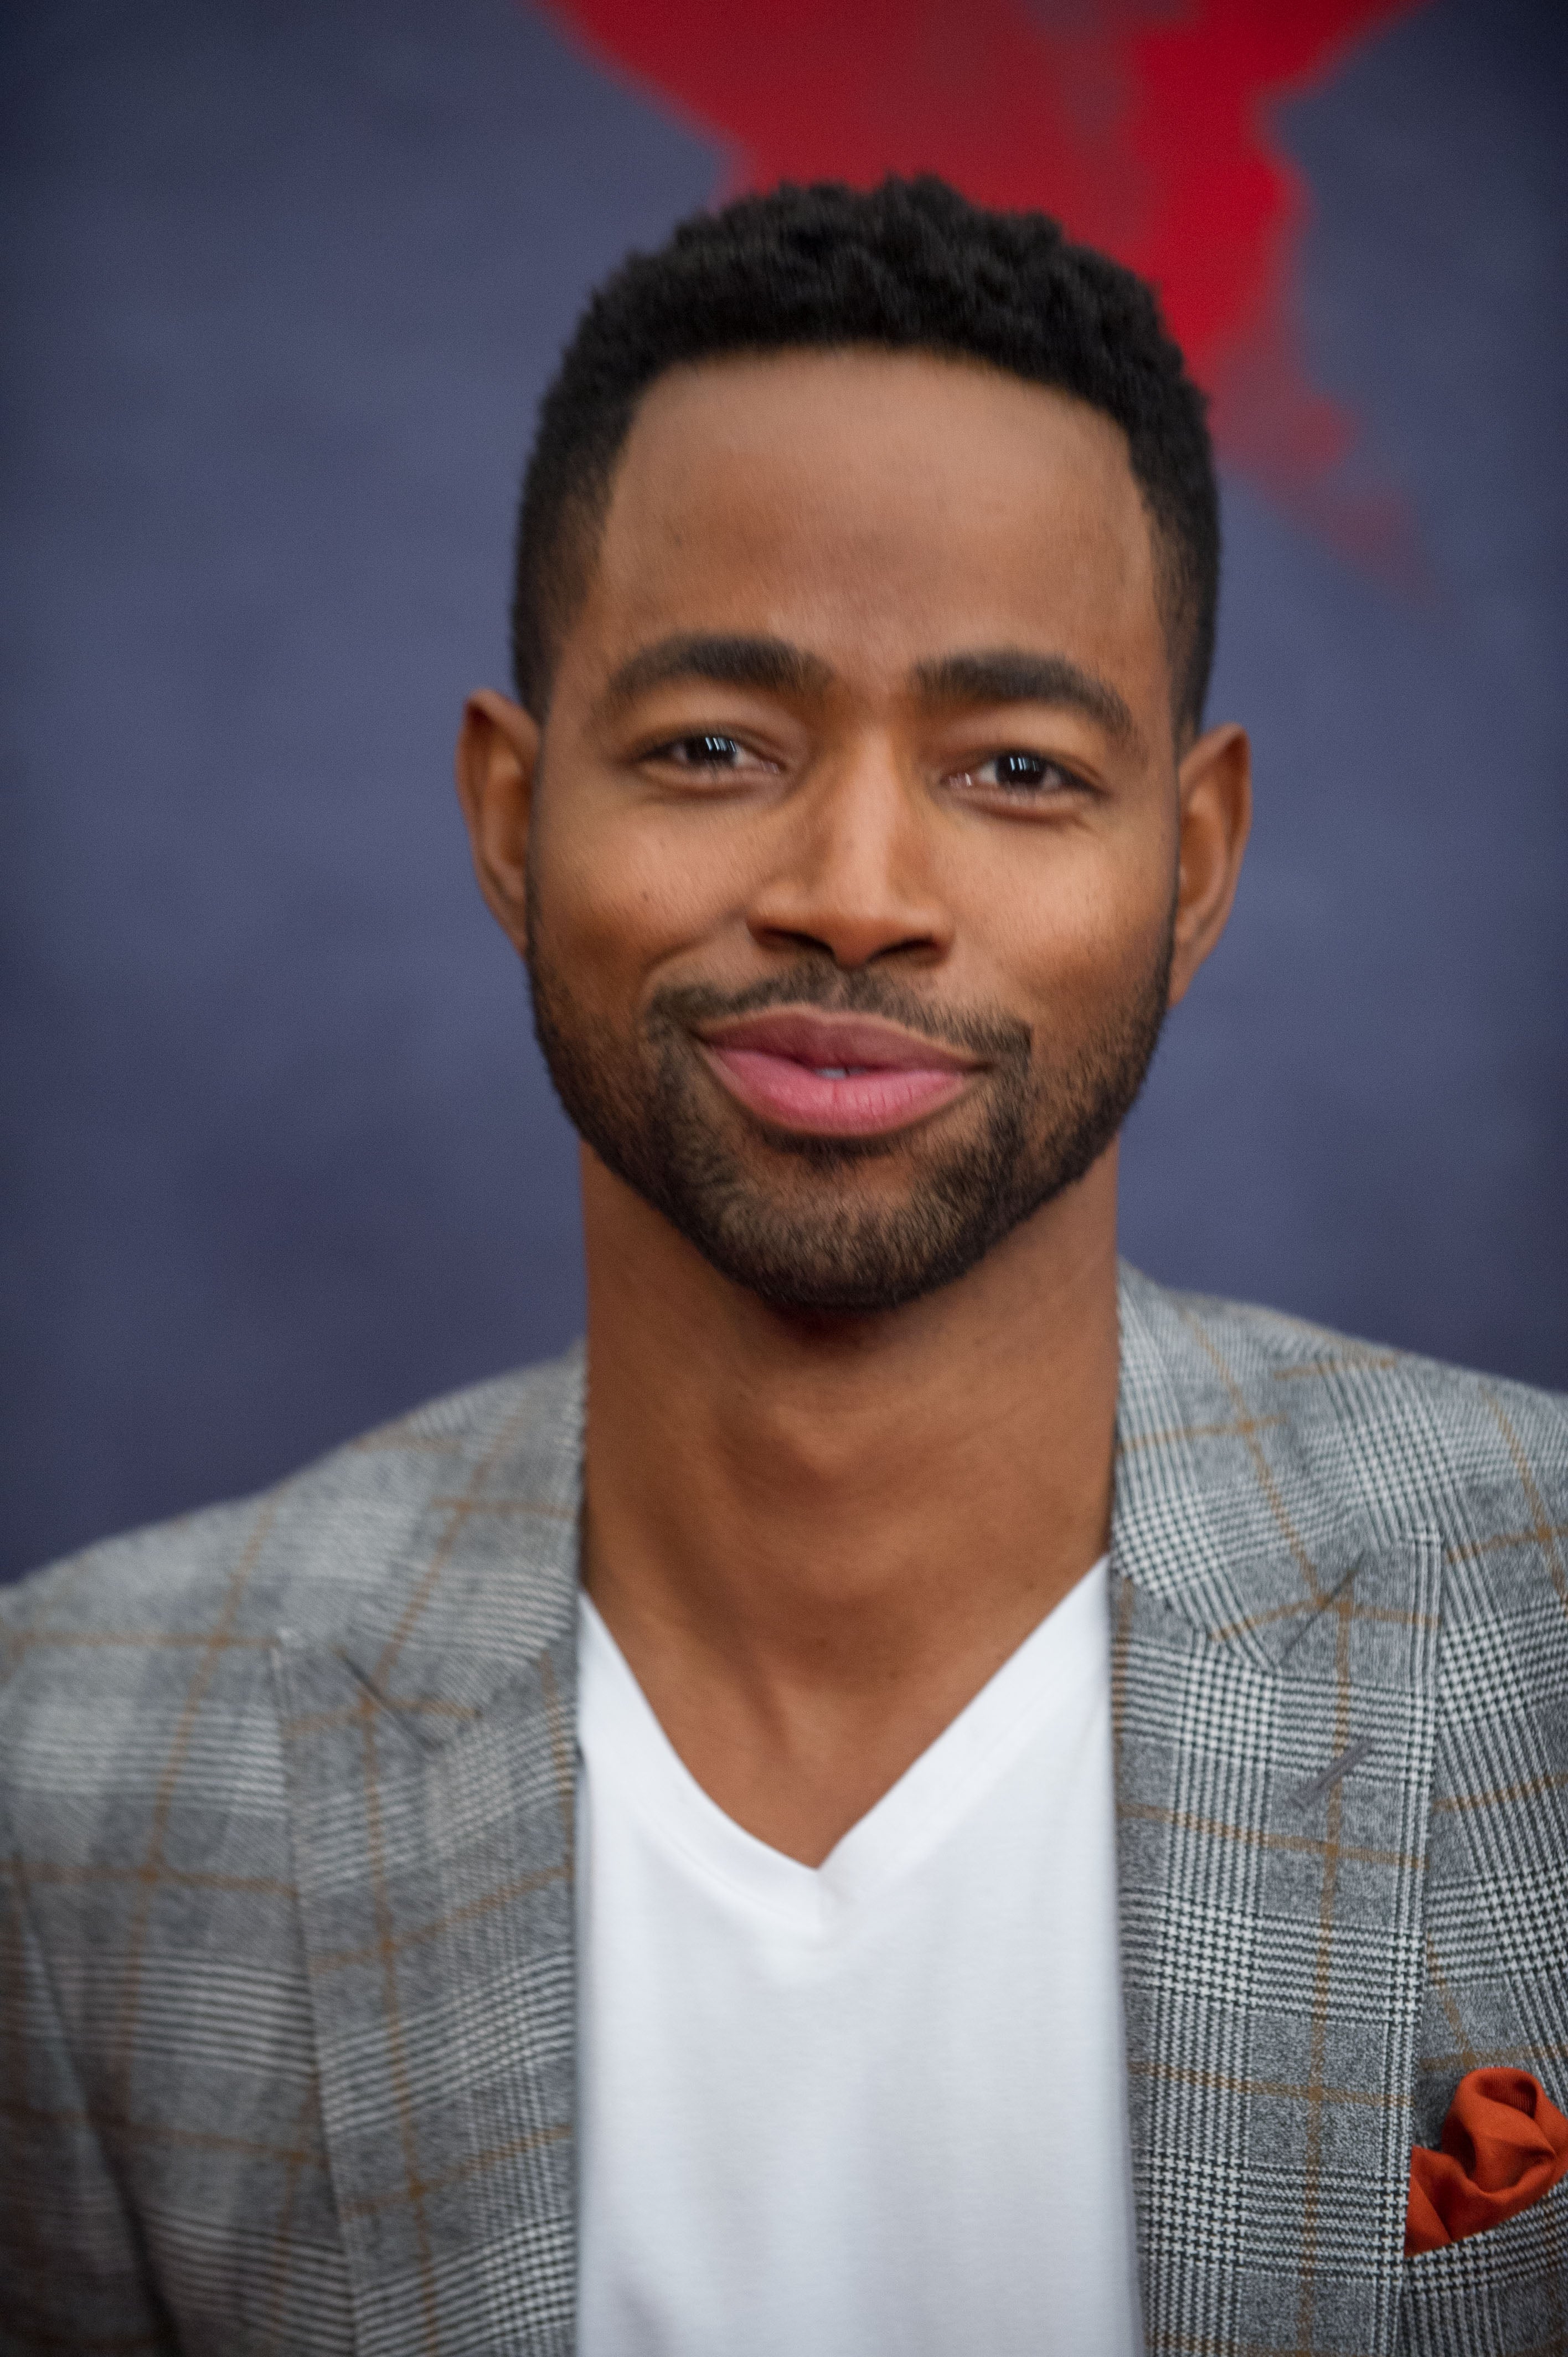 Blacks Still Account For Nearly Half Of New HIV Infections And Jay Ellis Wants Us To Stop Pretending There's Nothing To Talk About